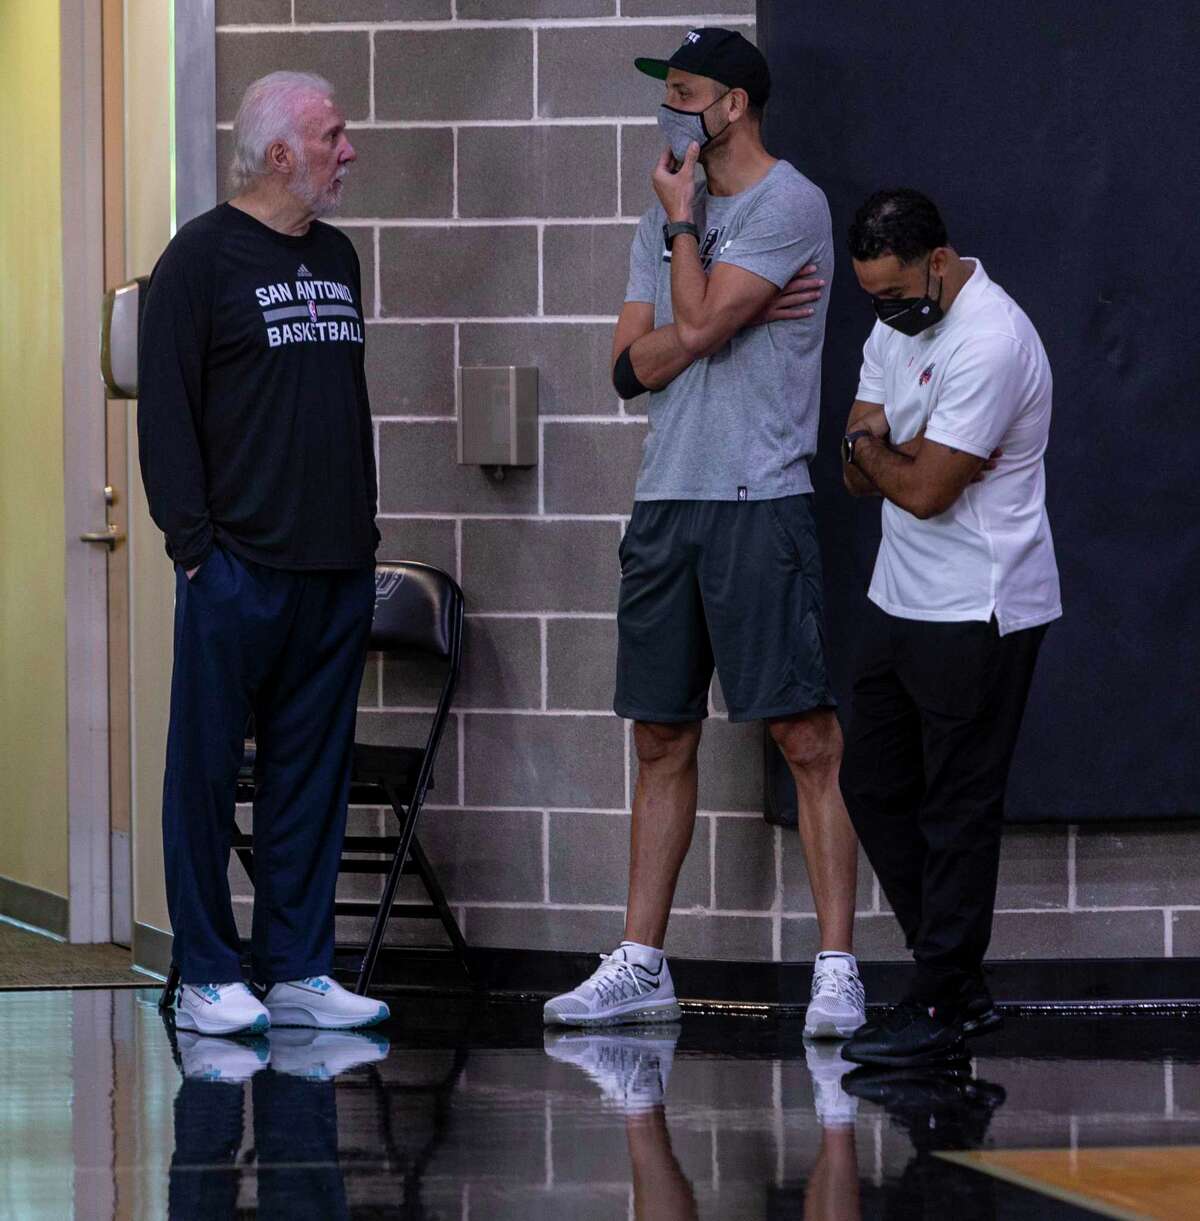 Spurs coach Gregg Popovich, left, talks Monday, Sept. 27, 2021 at the Spurs' practice facility with Manu Ginobili, center, during the team's media day